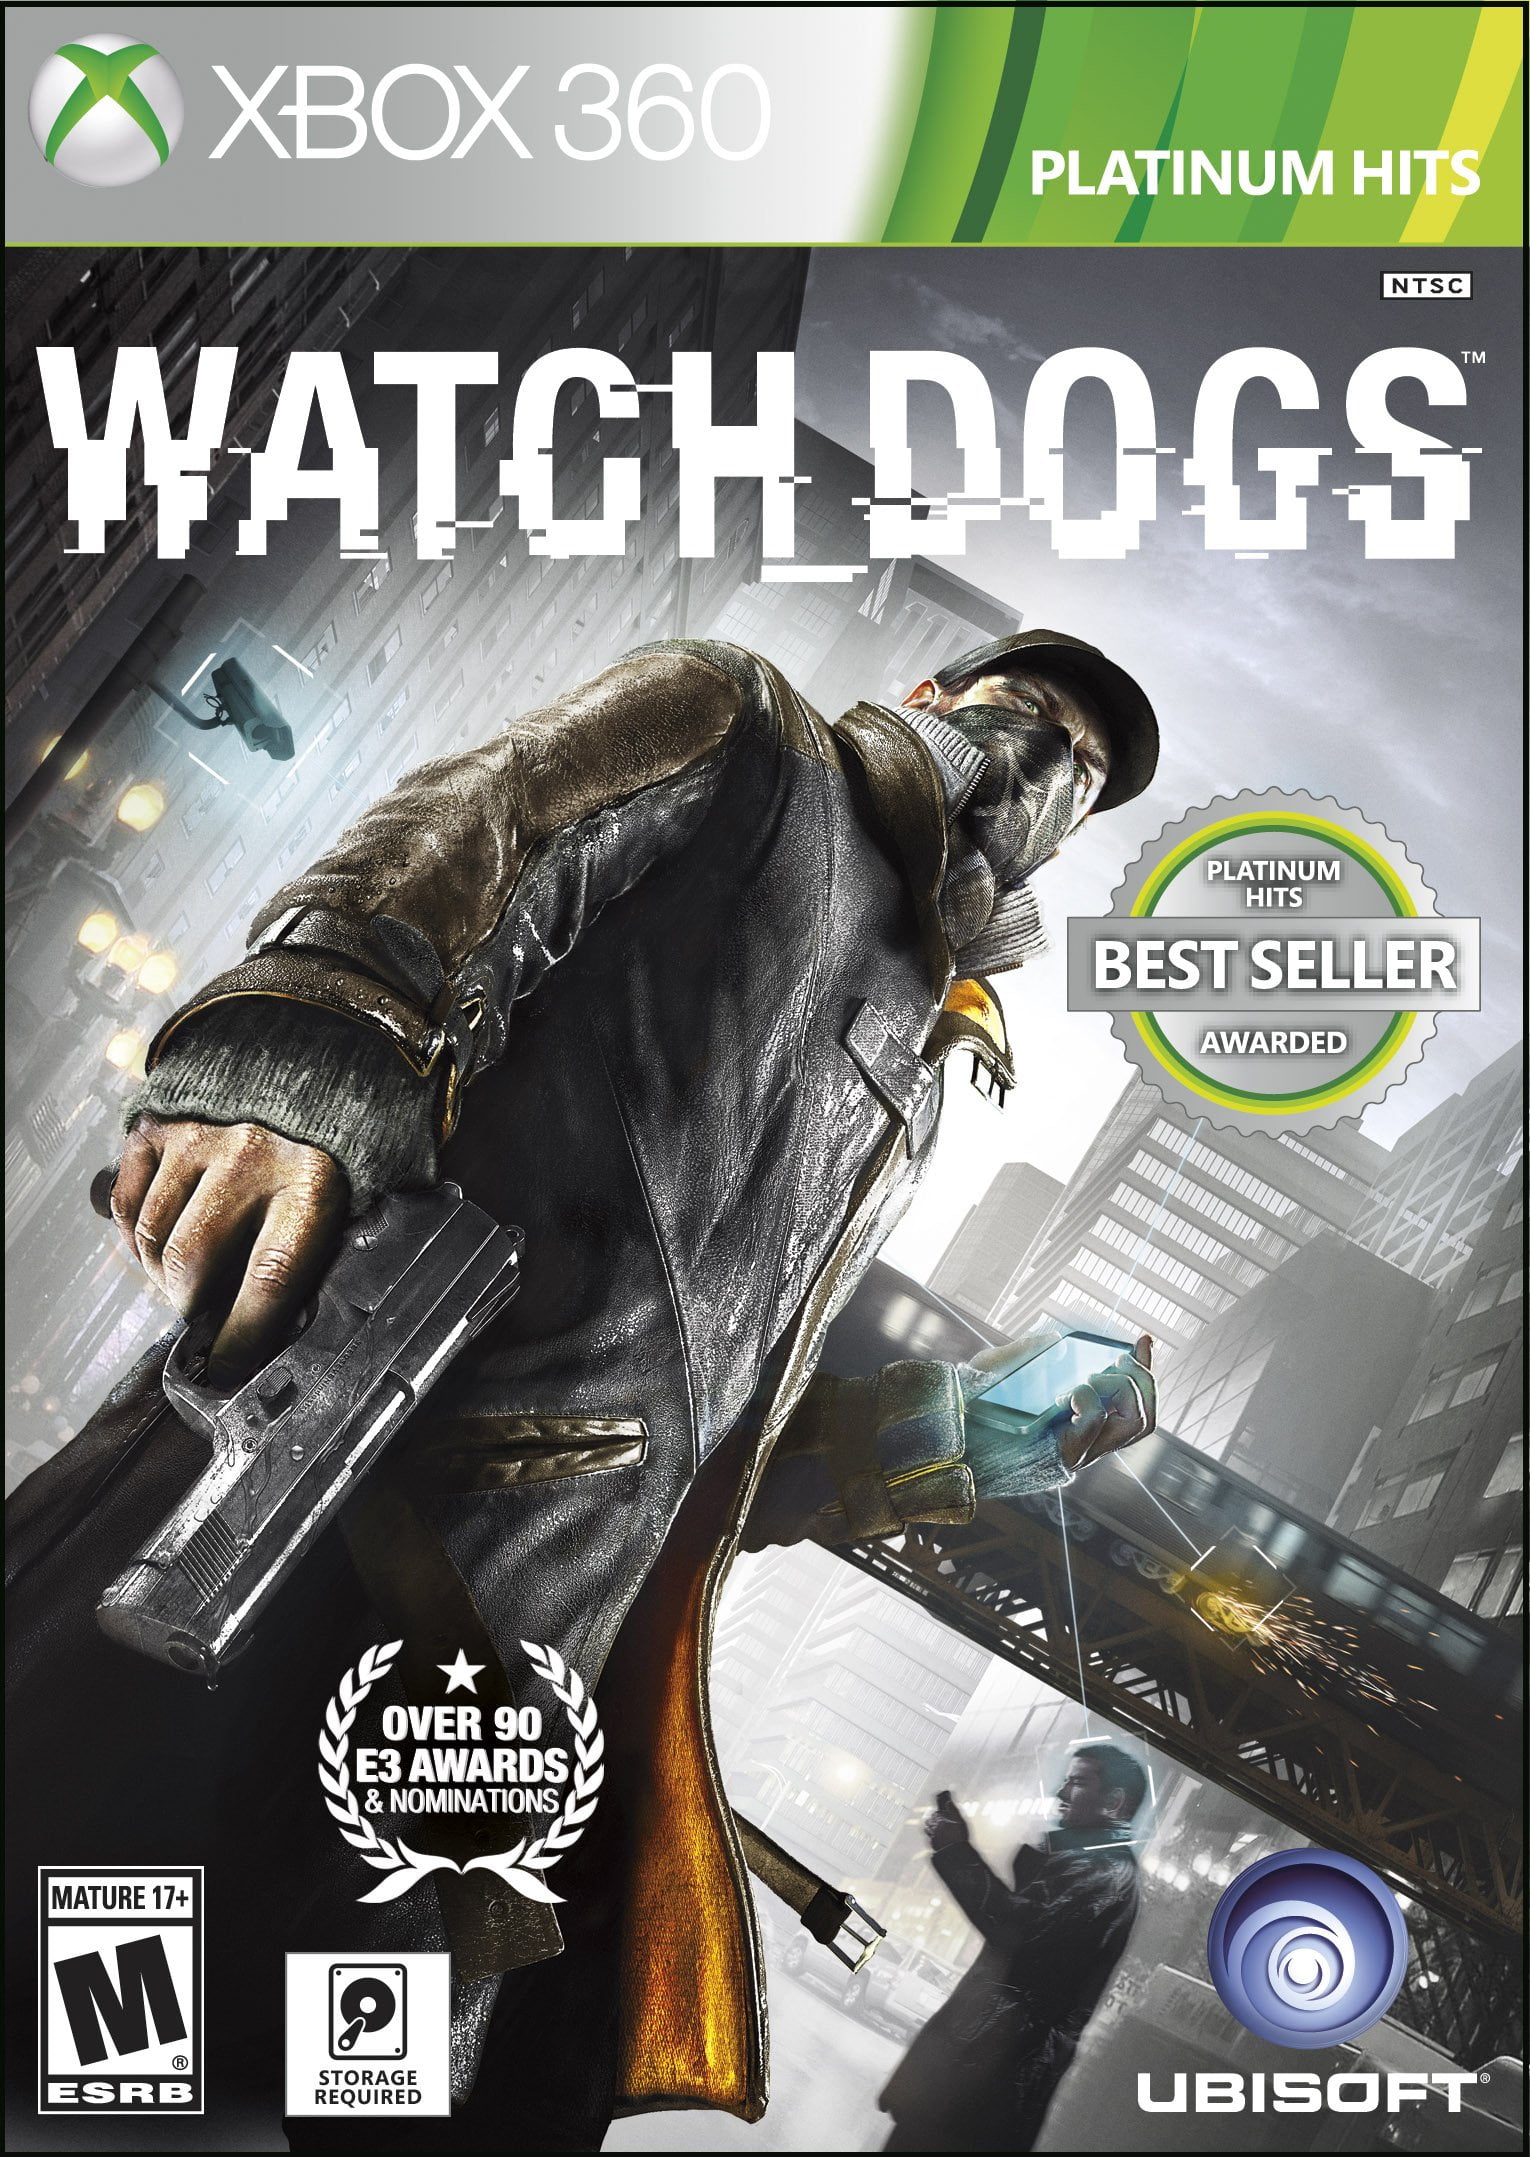  Watch Dogs - Xbox 360 : Ubisoft: Video Games